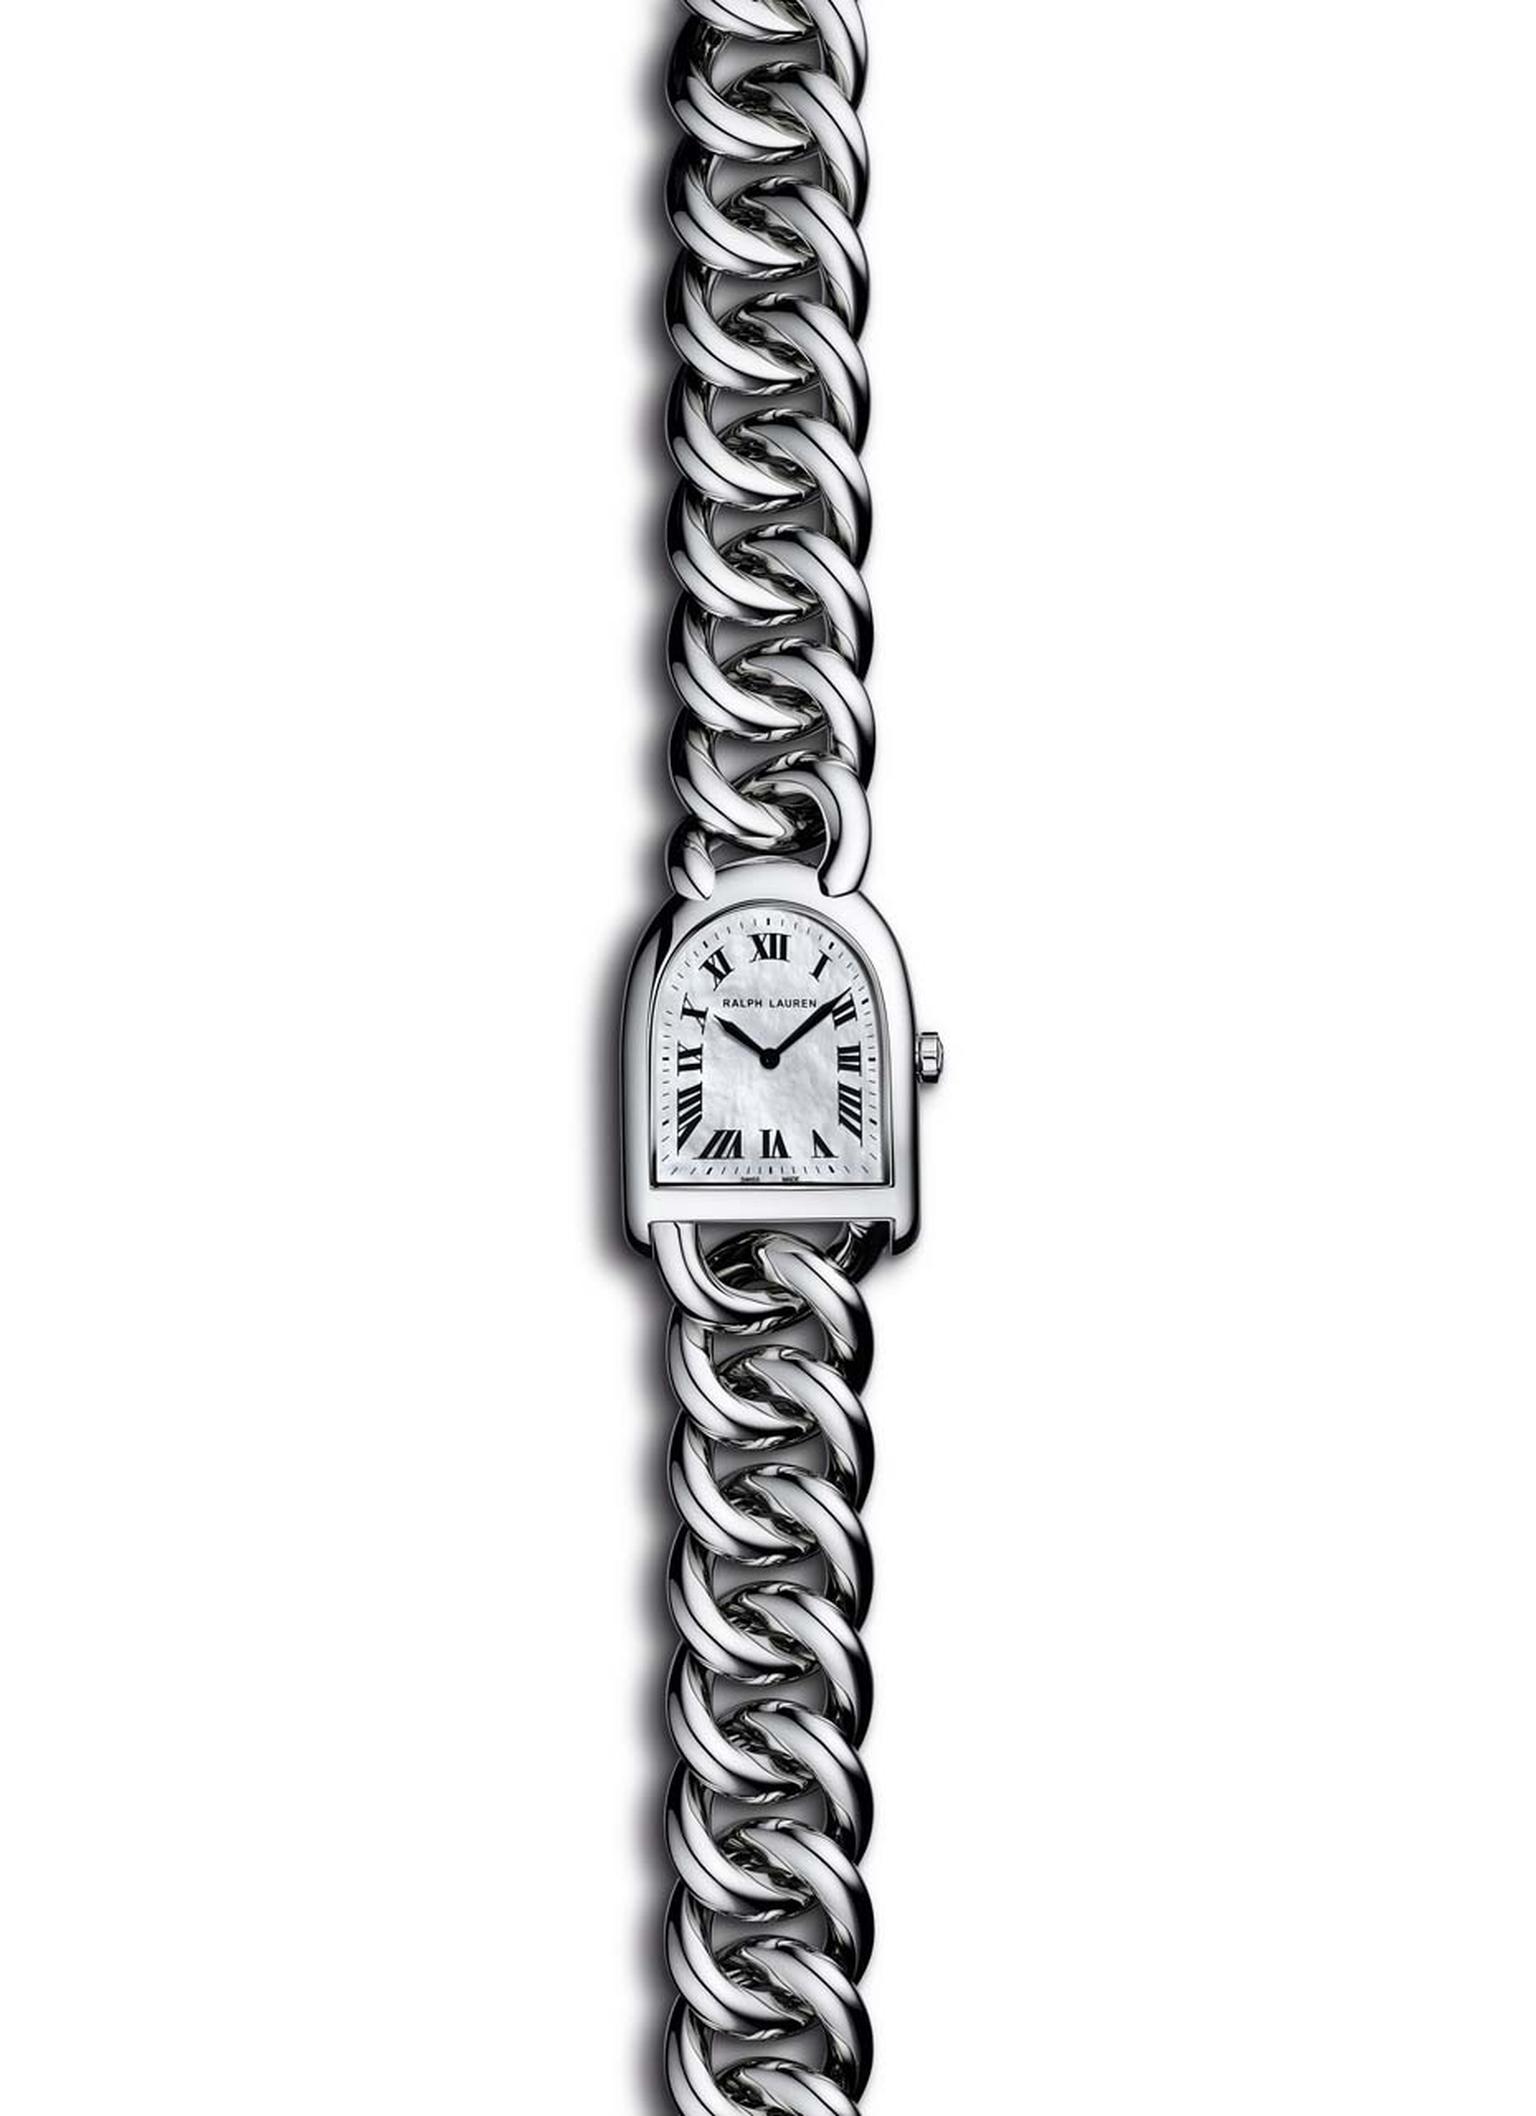 Ralph Lauren Stirrup Petite-Link watch is a contemporary classic and this model in stainless steel with a warm mother-of-pearl dial and diminutive dimensions -23.20 x 27 mm- makes an ideal mother's day present that will not be passé by next year.